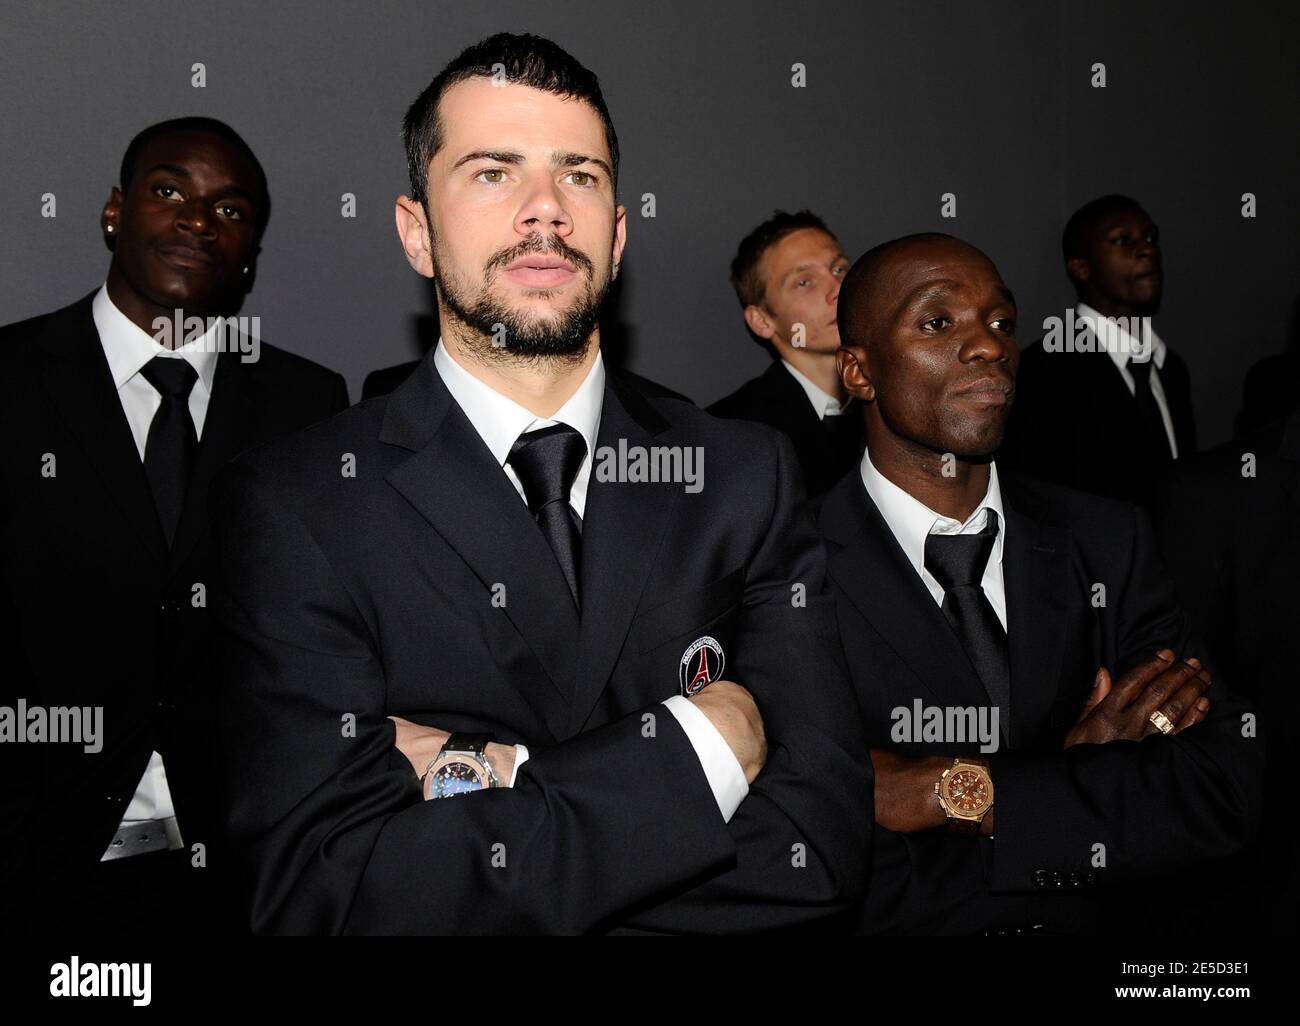 Mateja Kezman and Claude Makelele during the Opening of the new Formation Center of the Paris-St-Germain soccer club in Saint-Germain-en-Laye, France on November 4, 2008. Photo by Henri Szwarc/Cameleon/ABACAPRESS.COM Stock Photo